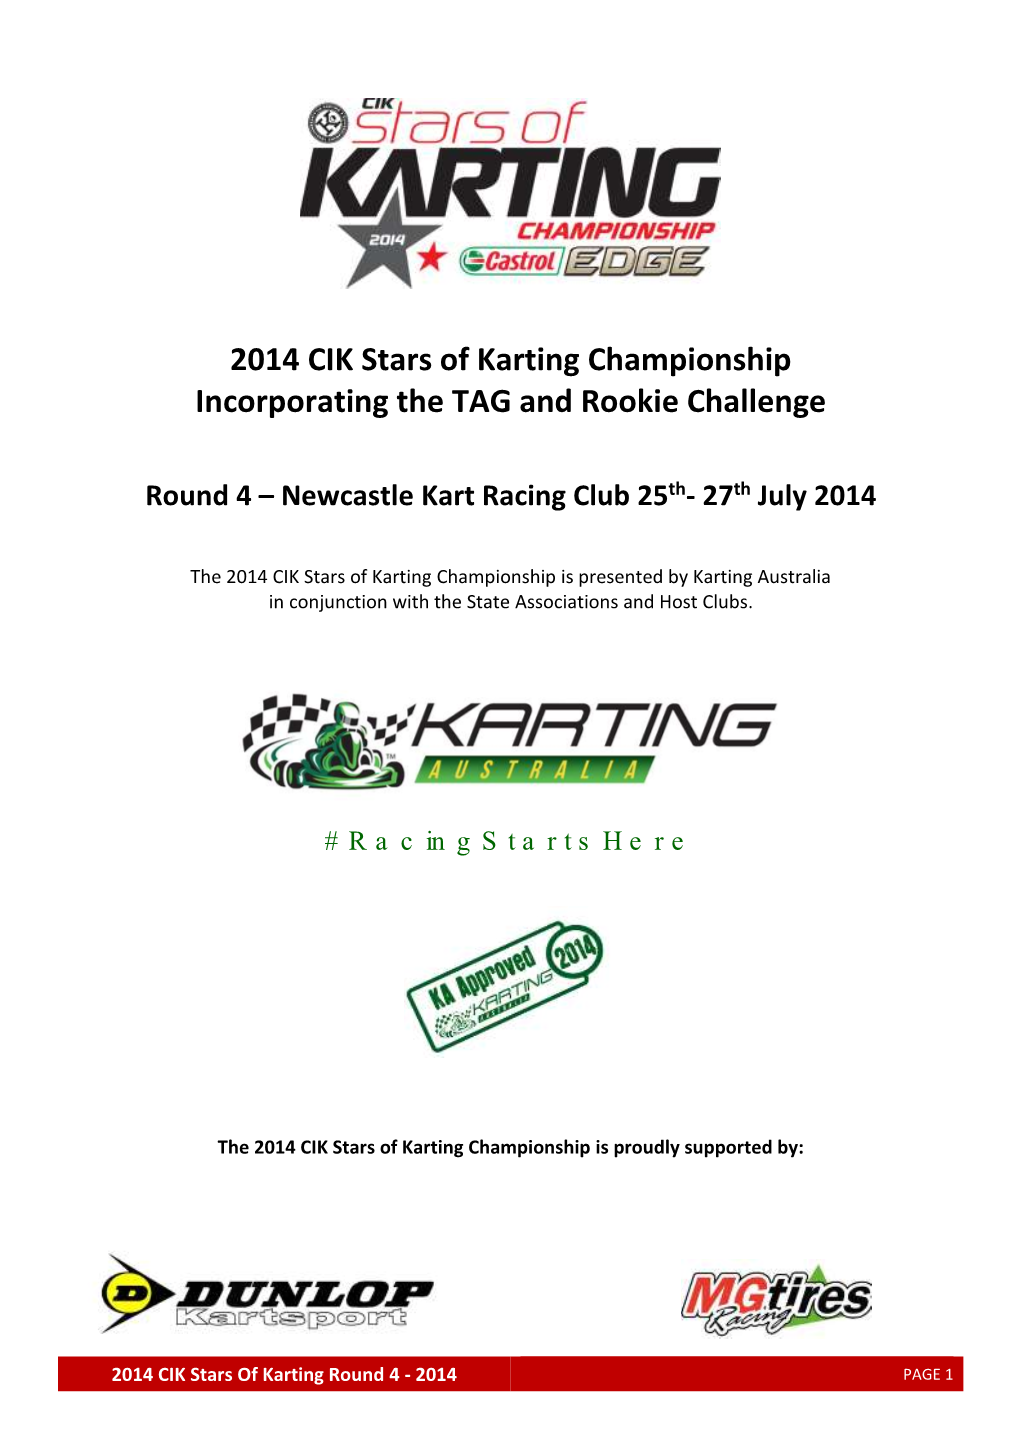 2014 CIK Stars of Karting Championship Incorporating the TAG and Rookie Challenge